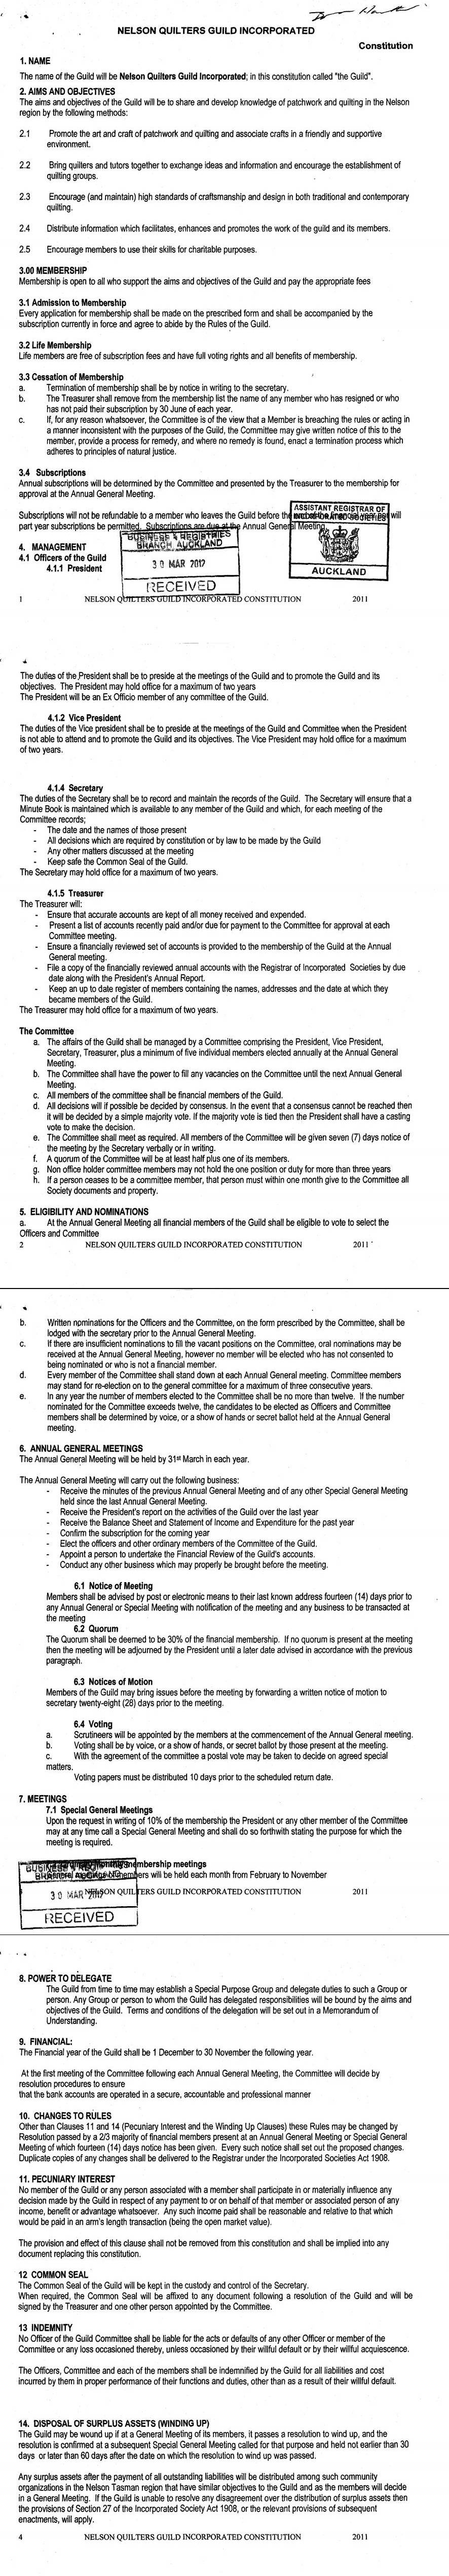 Image of the guild's constitution document